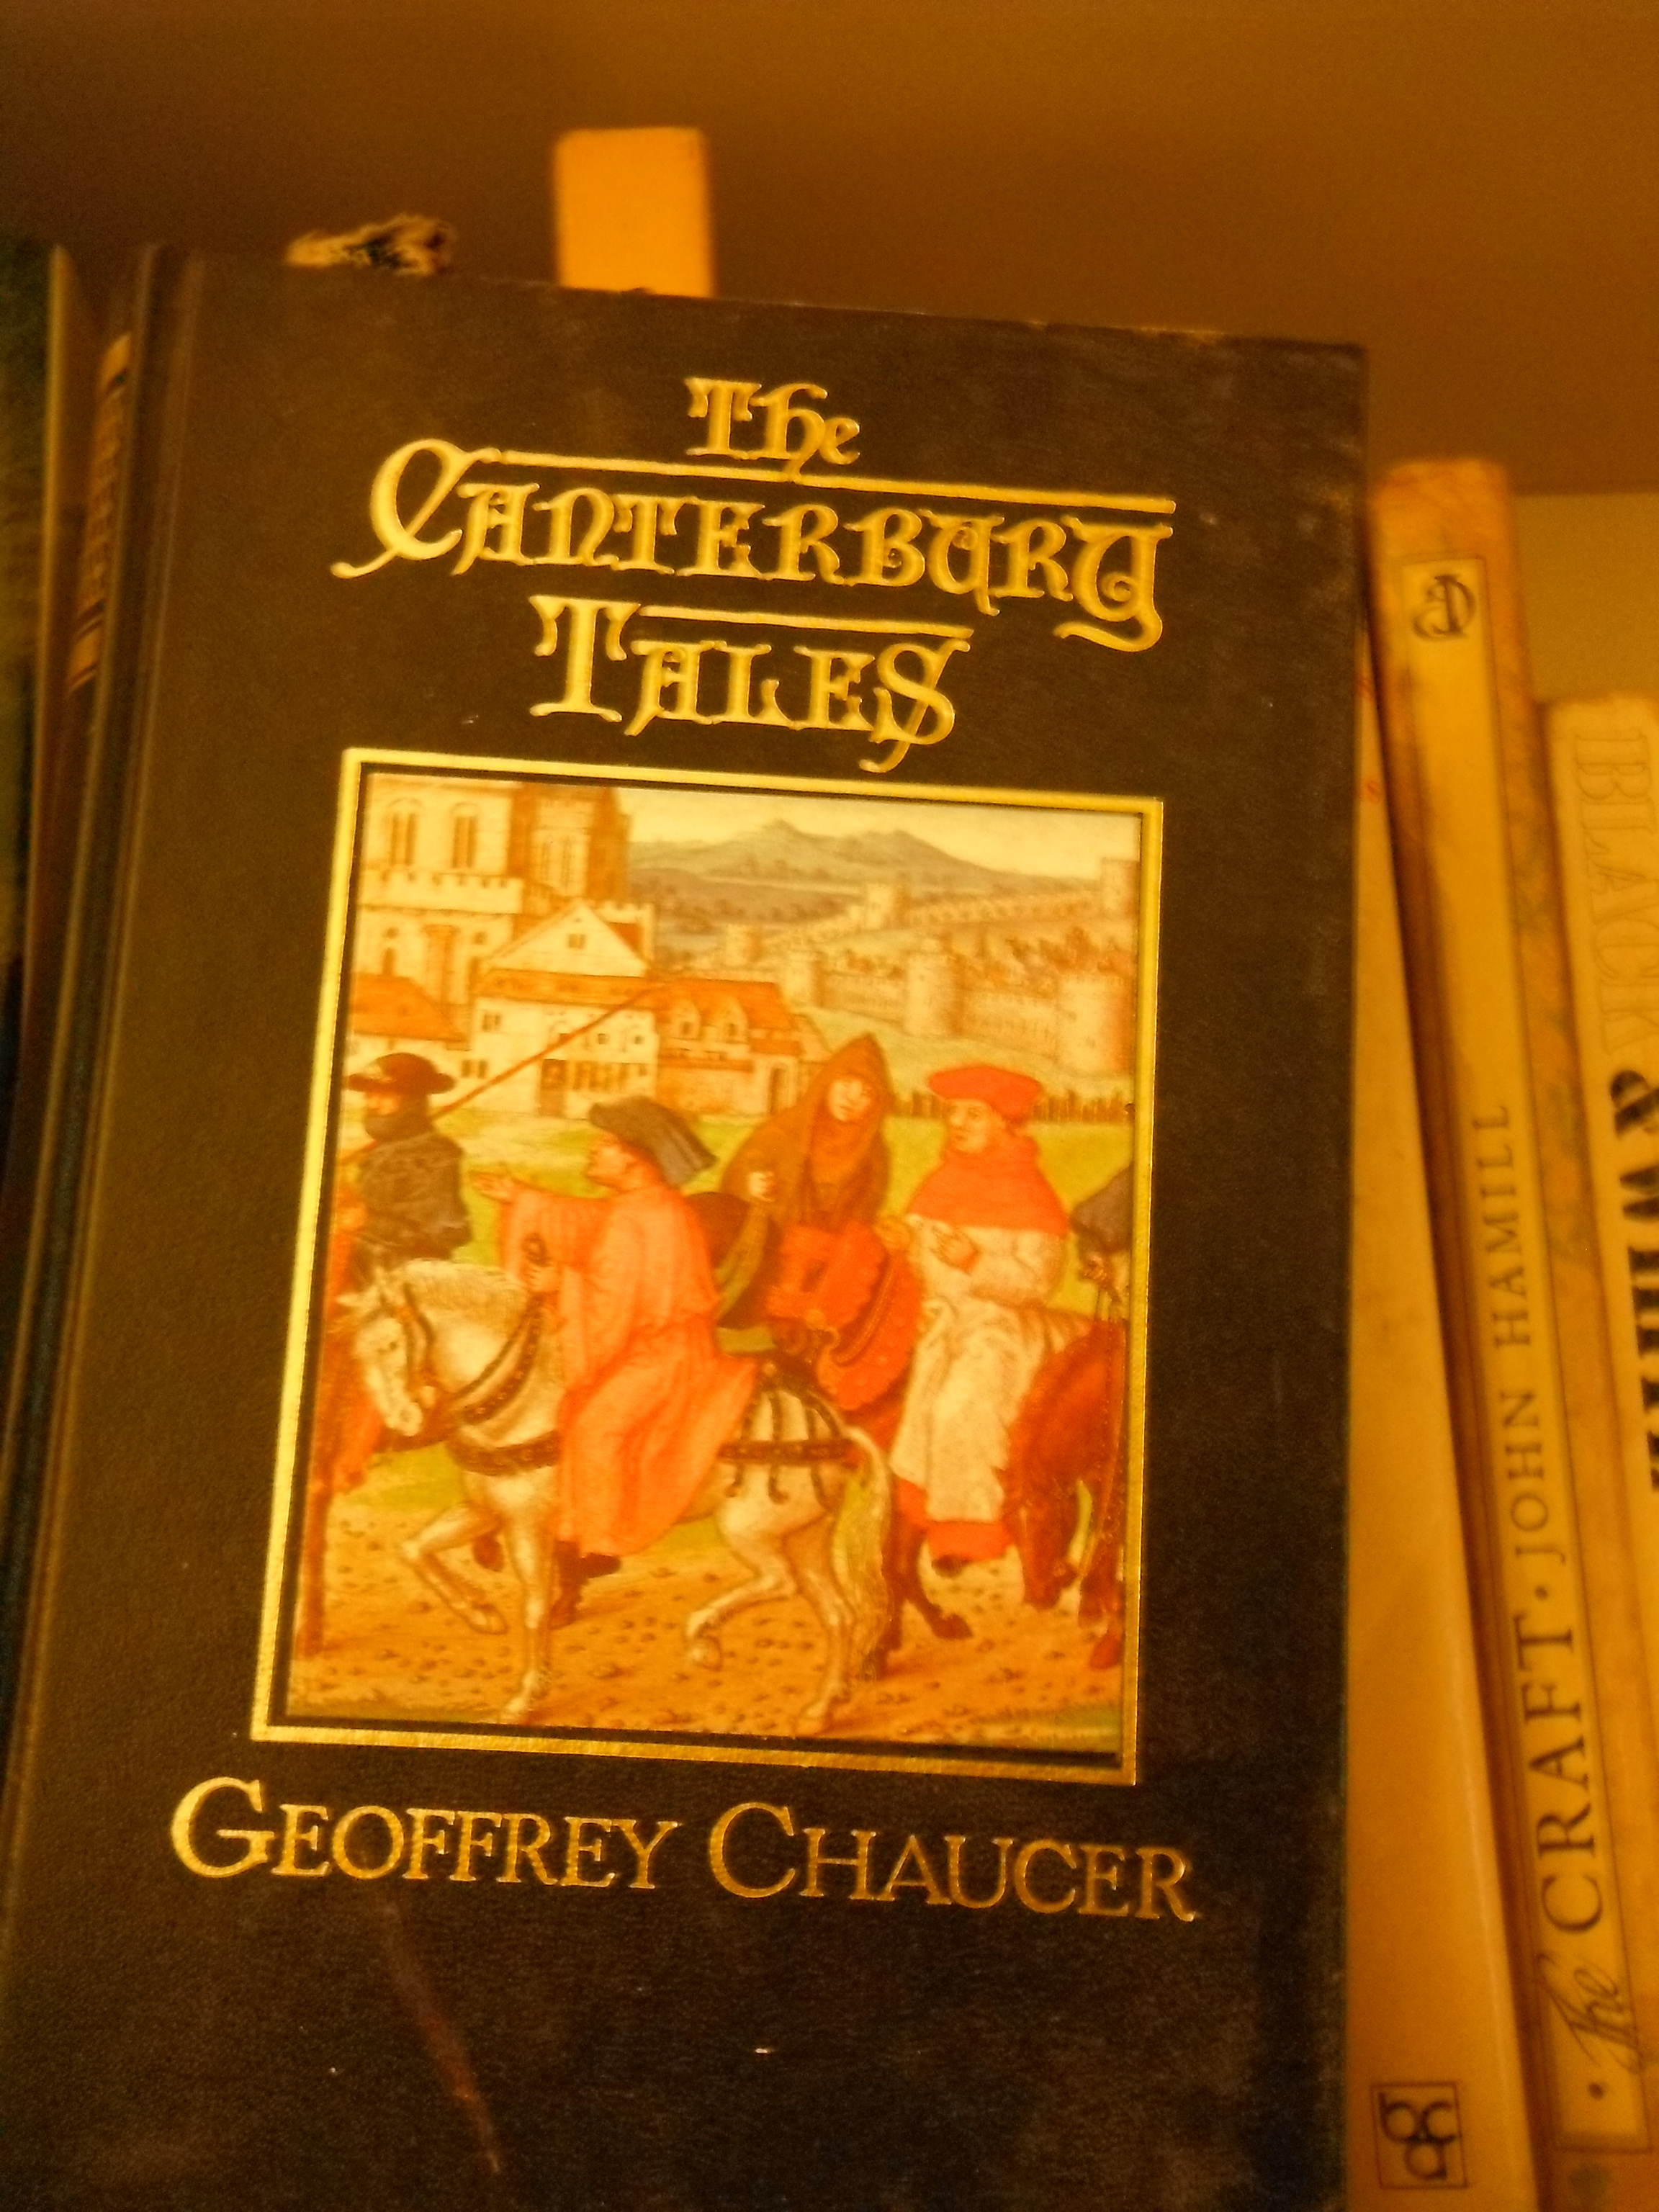 Photo taken by me – Chaucer’s Canterbury Tales book cover 